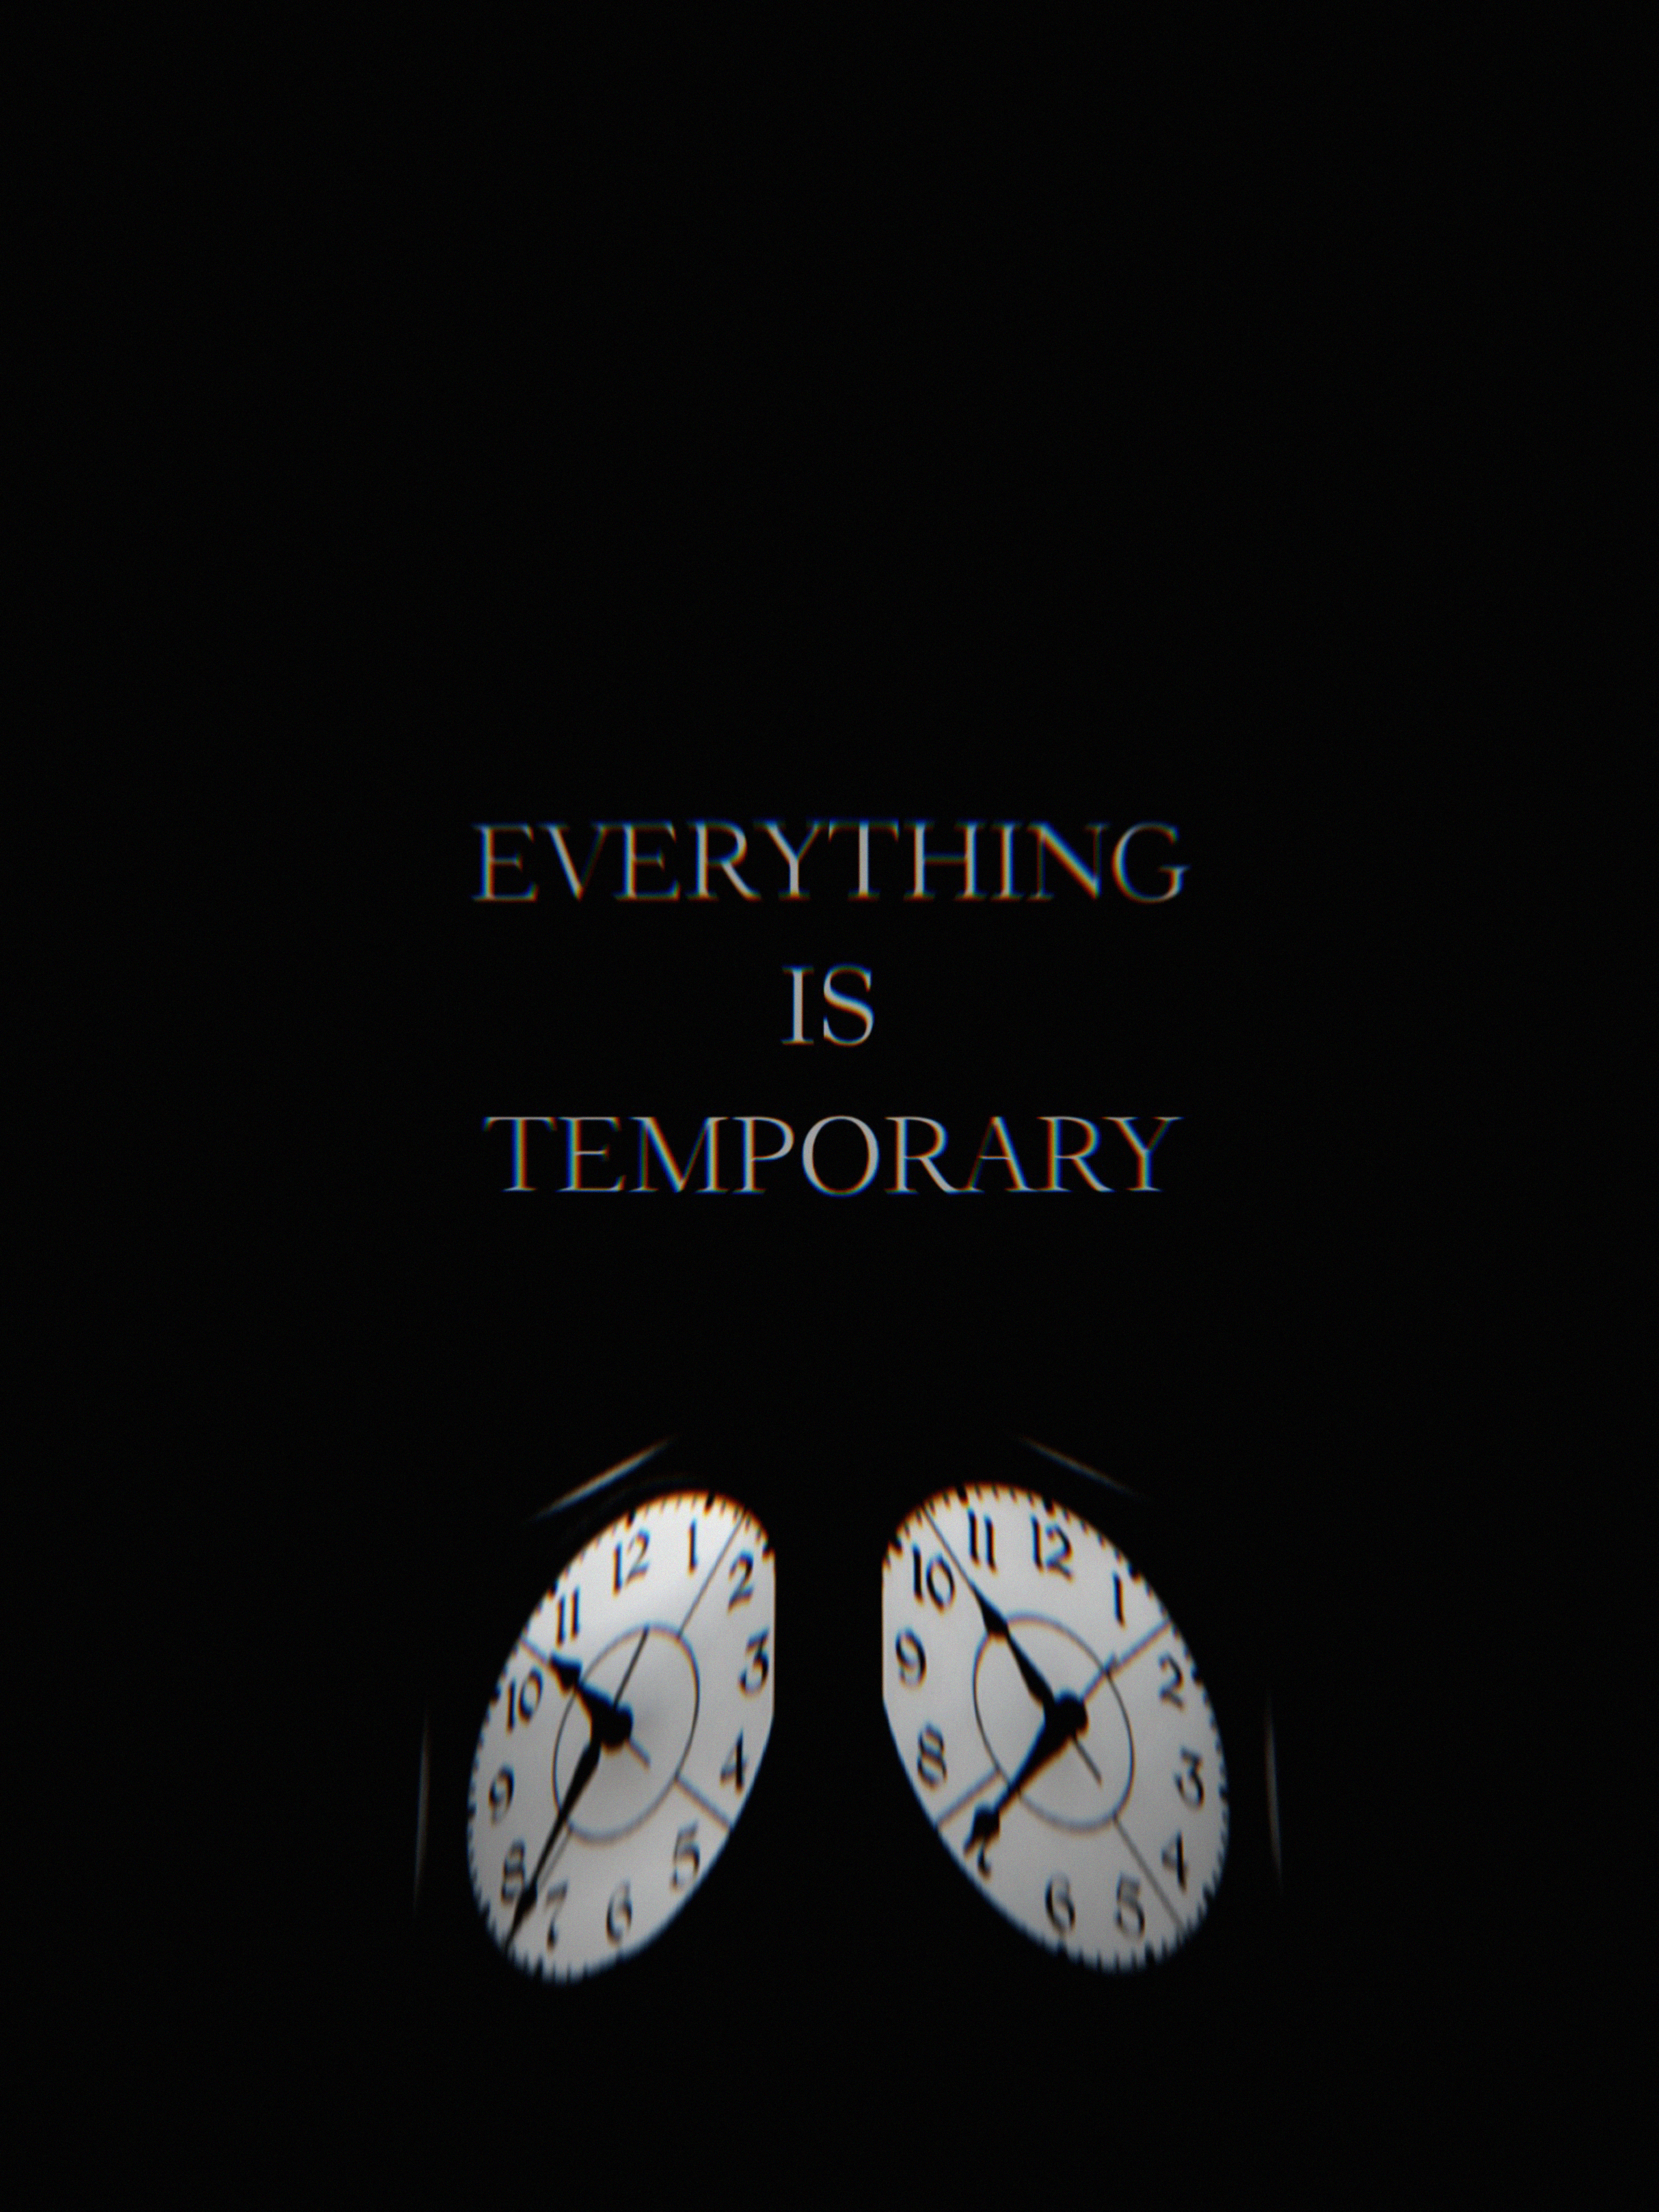 words, life, it's time, time, clock, glitch, temporary HD wallpaper